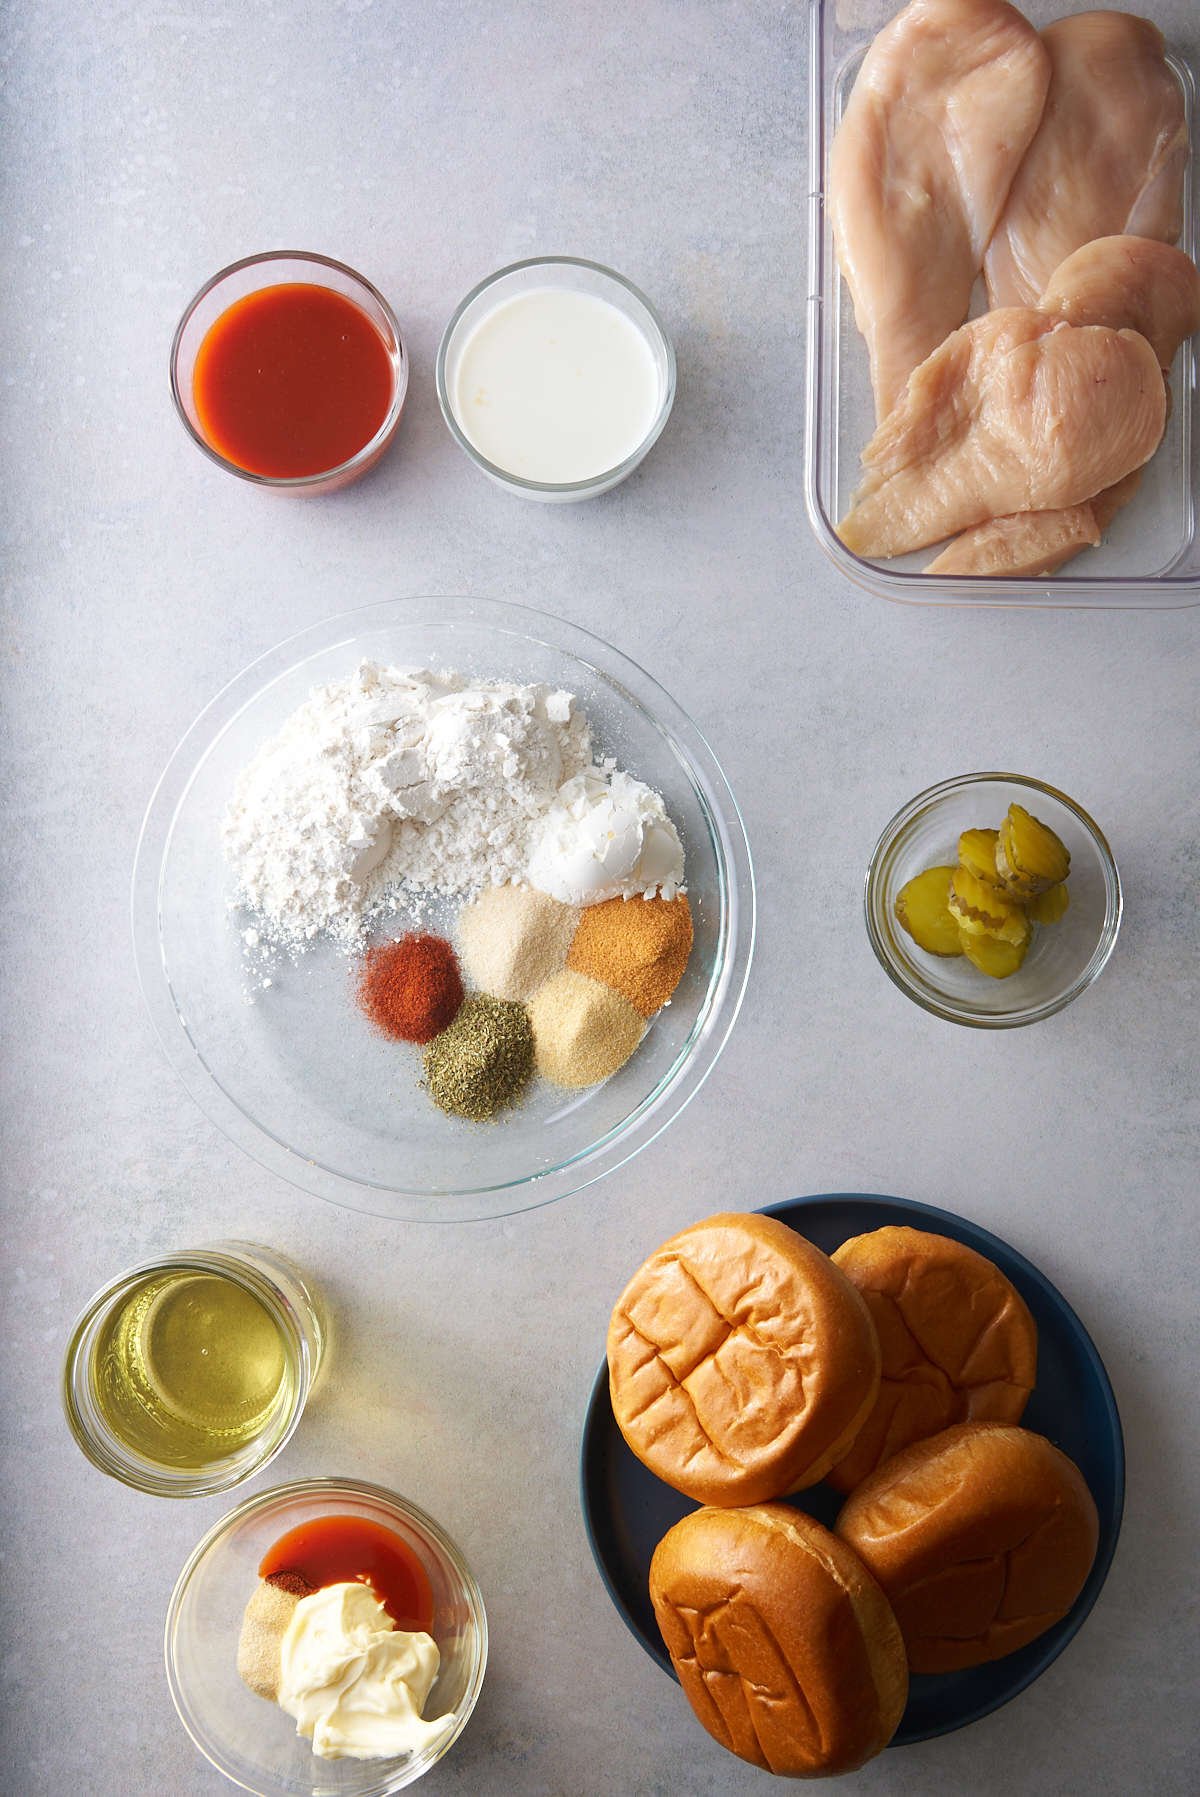 ingredients for fried chicken sandwich on table